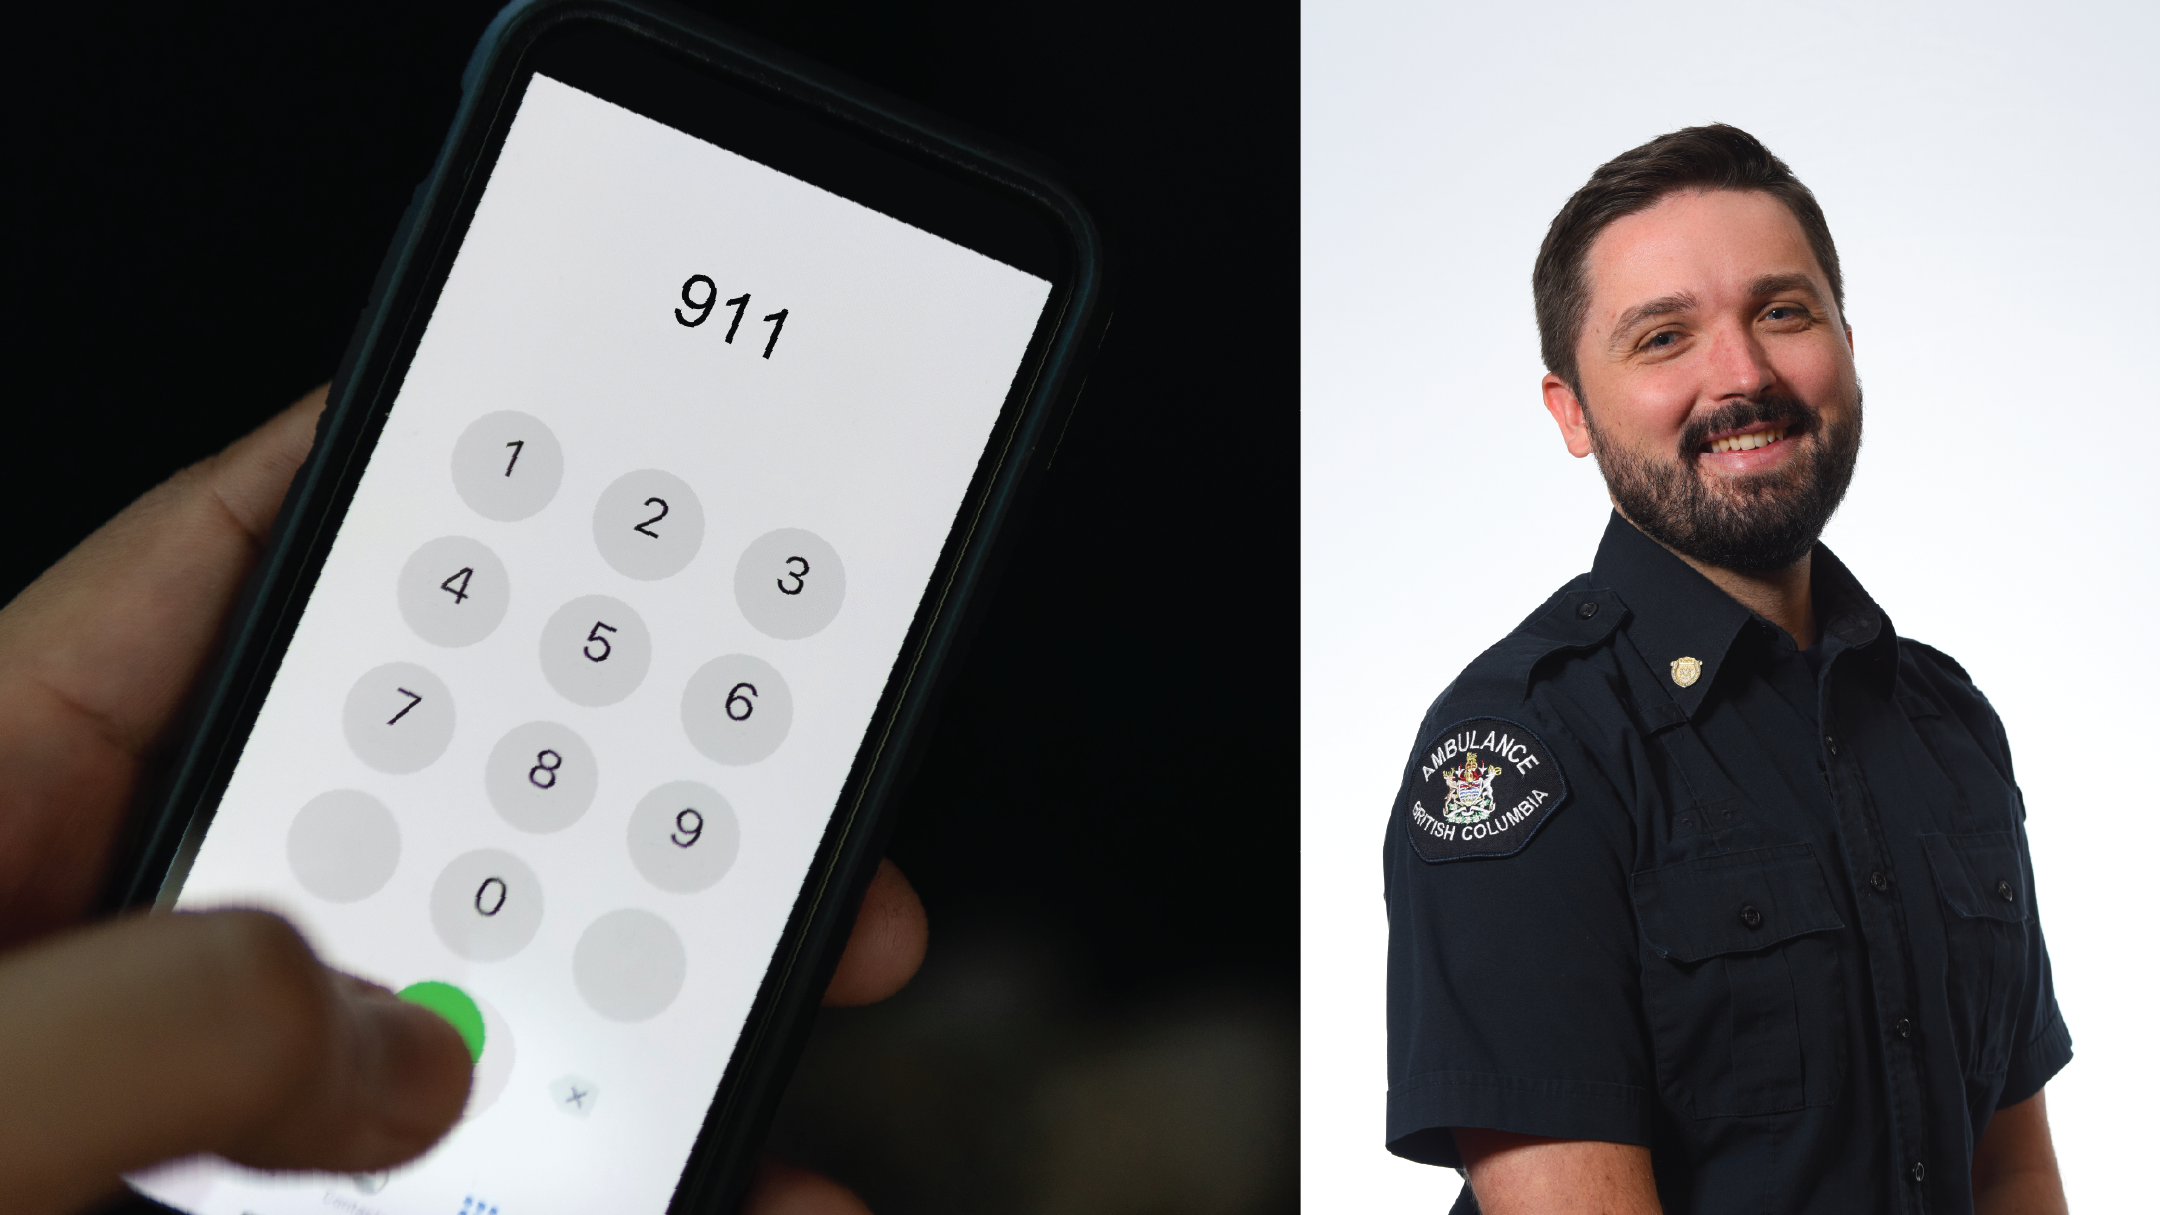 dialing 9-1-1 on a cell phone beside a photo of call-taker Adam Nataros